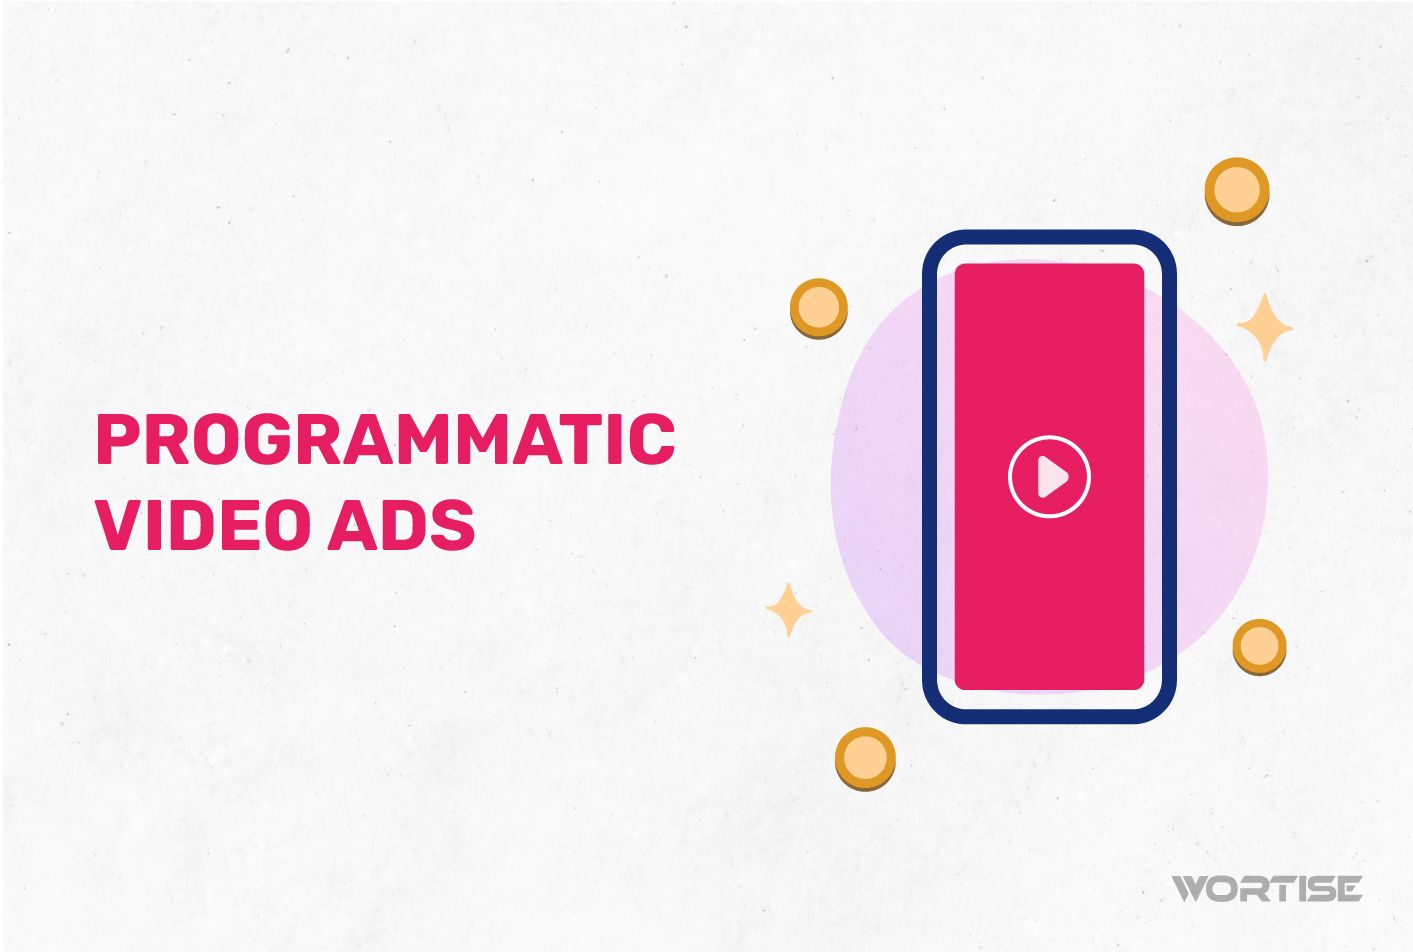 Video killed the revenue star: 9 tips to monetize more with programmatic video ads